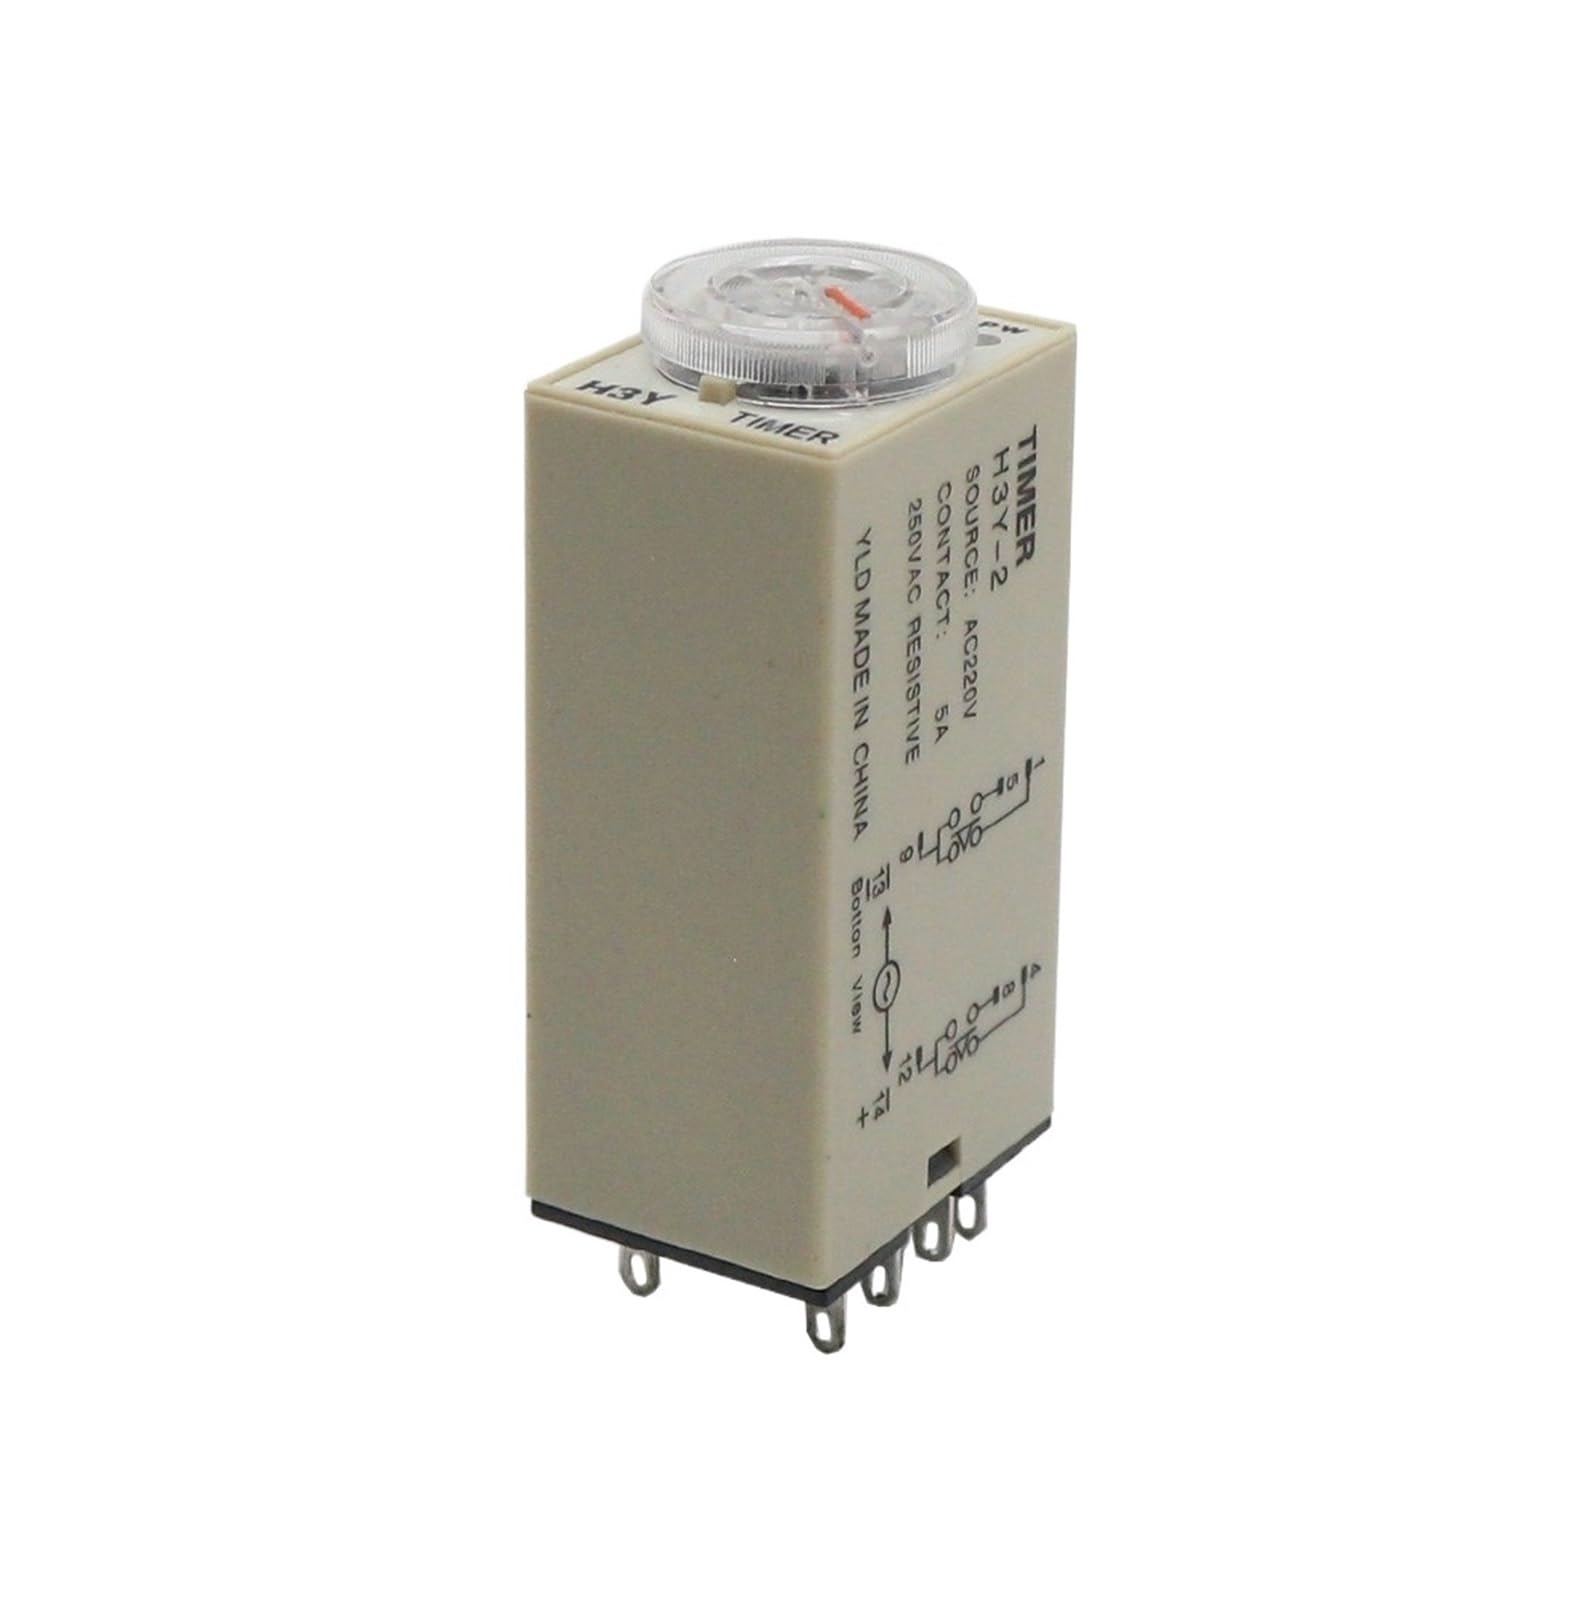 1pcs Power on Delay Time Relay H3Y-2 Small 8-pinDC12V24vAC220v Timer Switch 1S 3S 5S 30S 60S 5M 10M 30M 60M OSBCMZGE(AC 220V,H3Y-2 1Sec) von OSBCMZGE